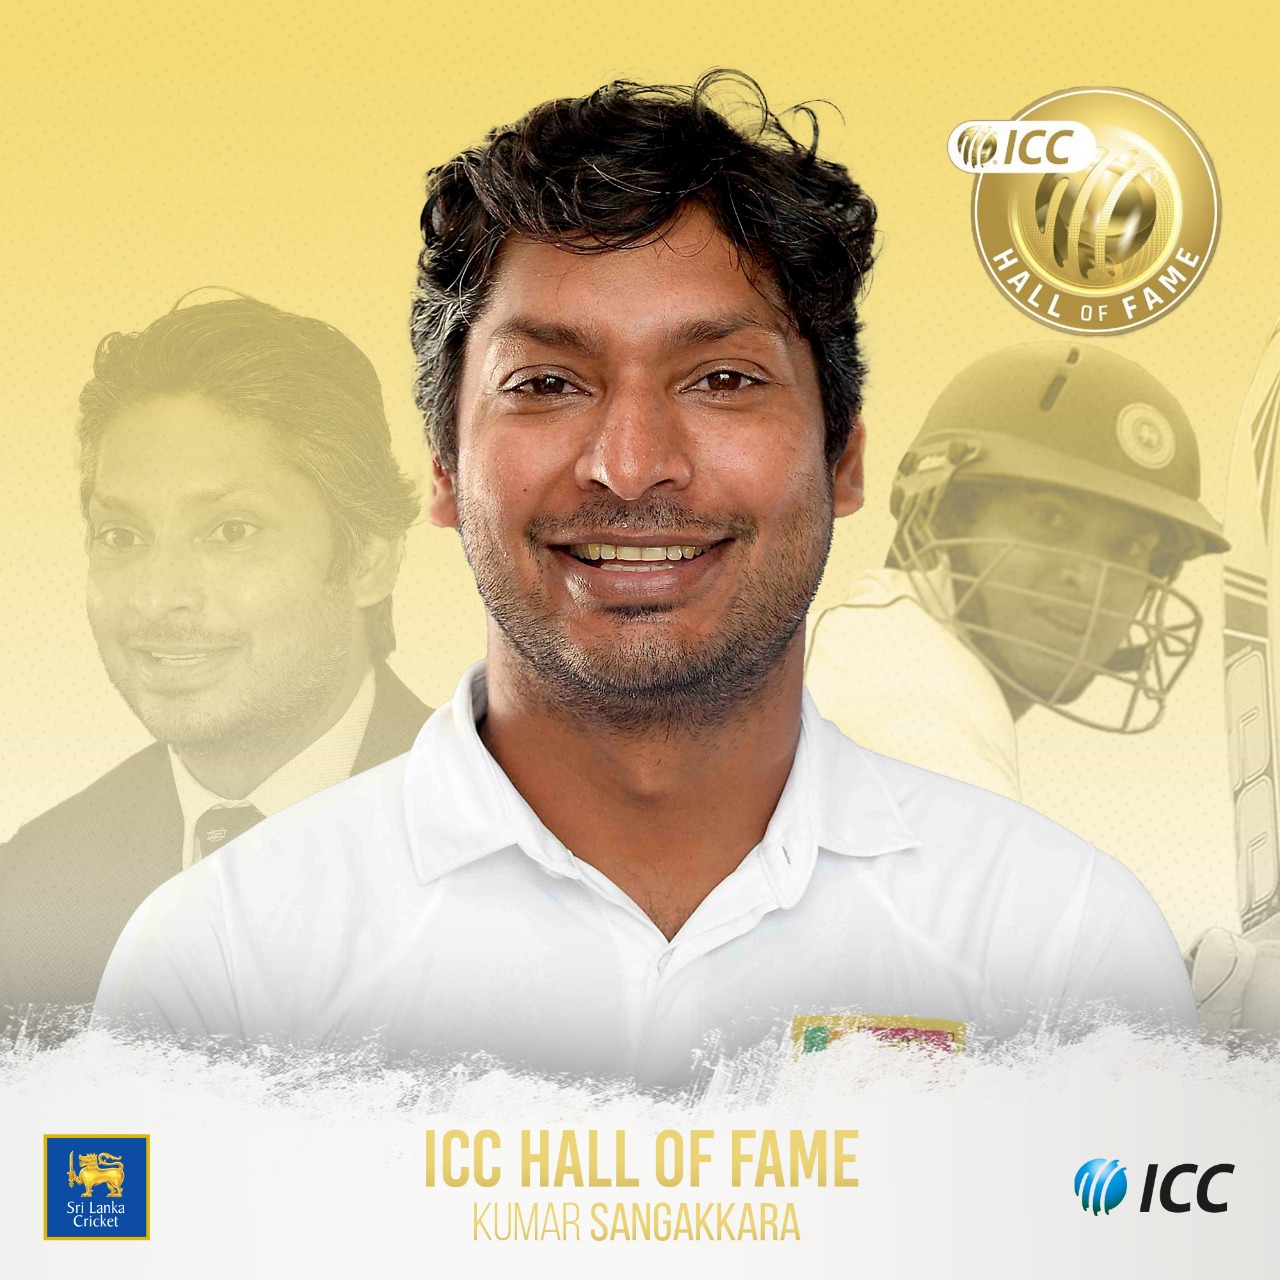 ICC Hall of Fame special inductions announced to mark the inaugural ICC World Test Championship Final